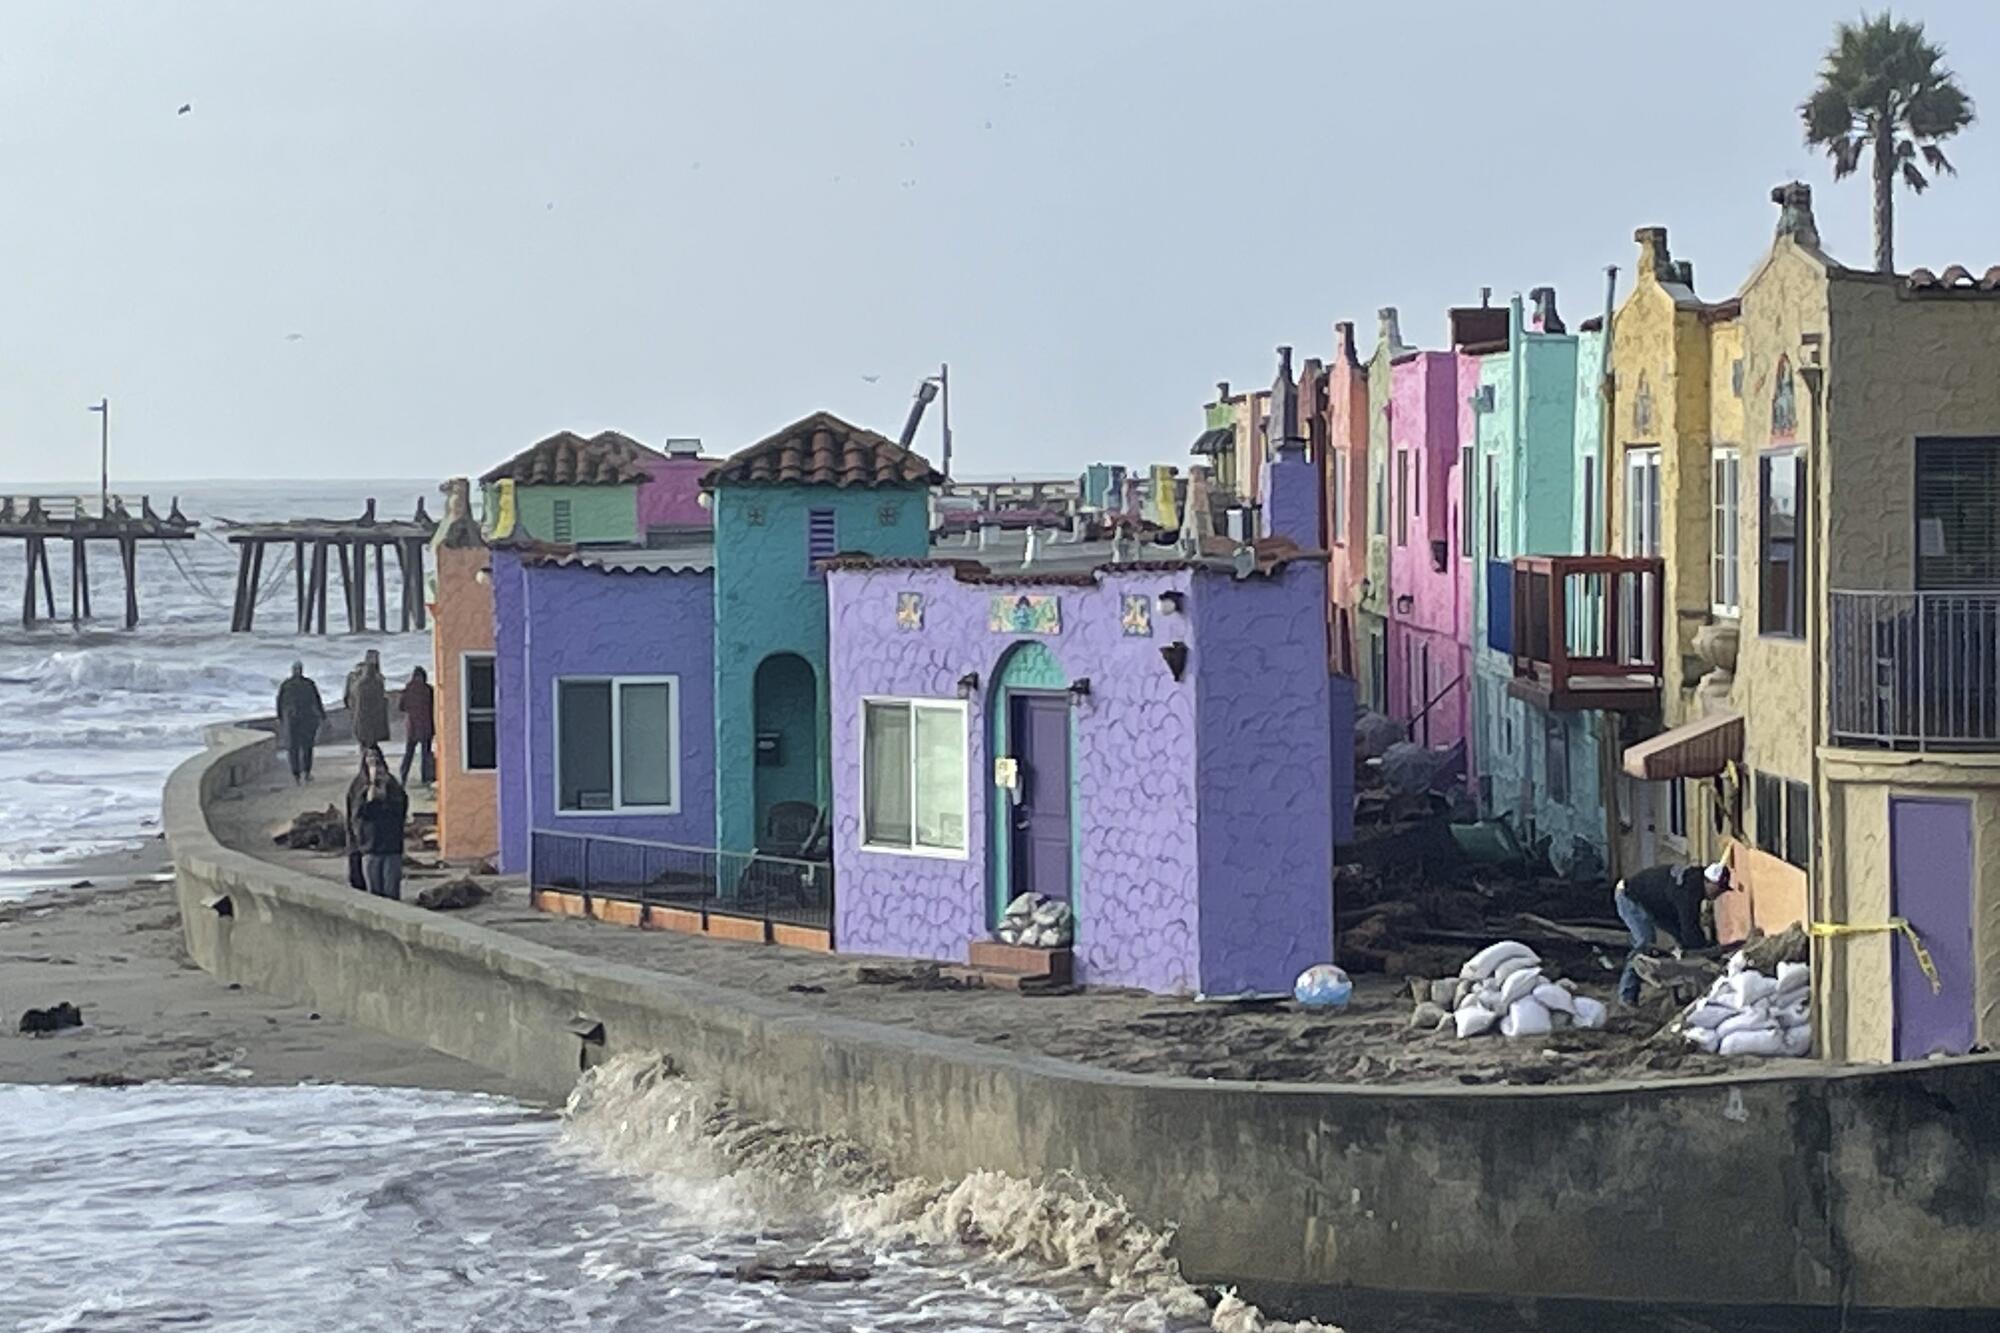 People walk through a storm-damaged section of a seaside grouping of buildings with facades of different pastel colors